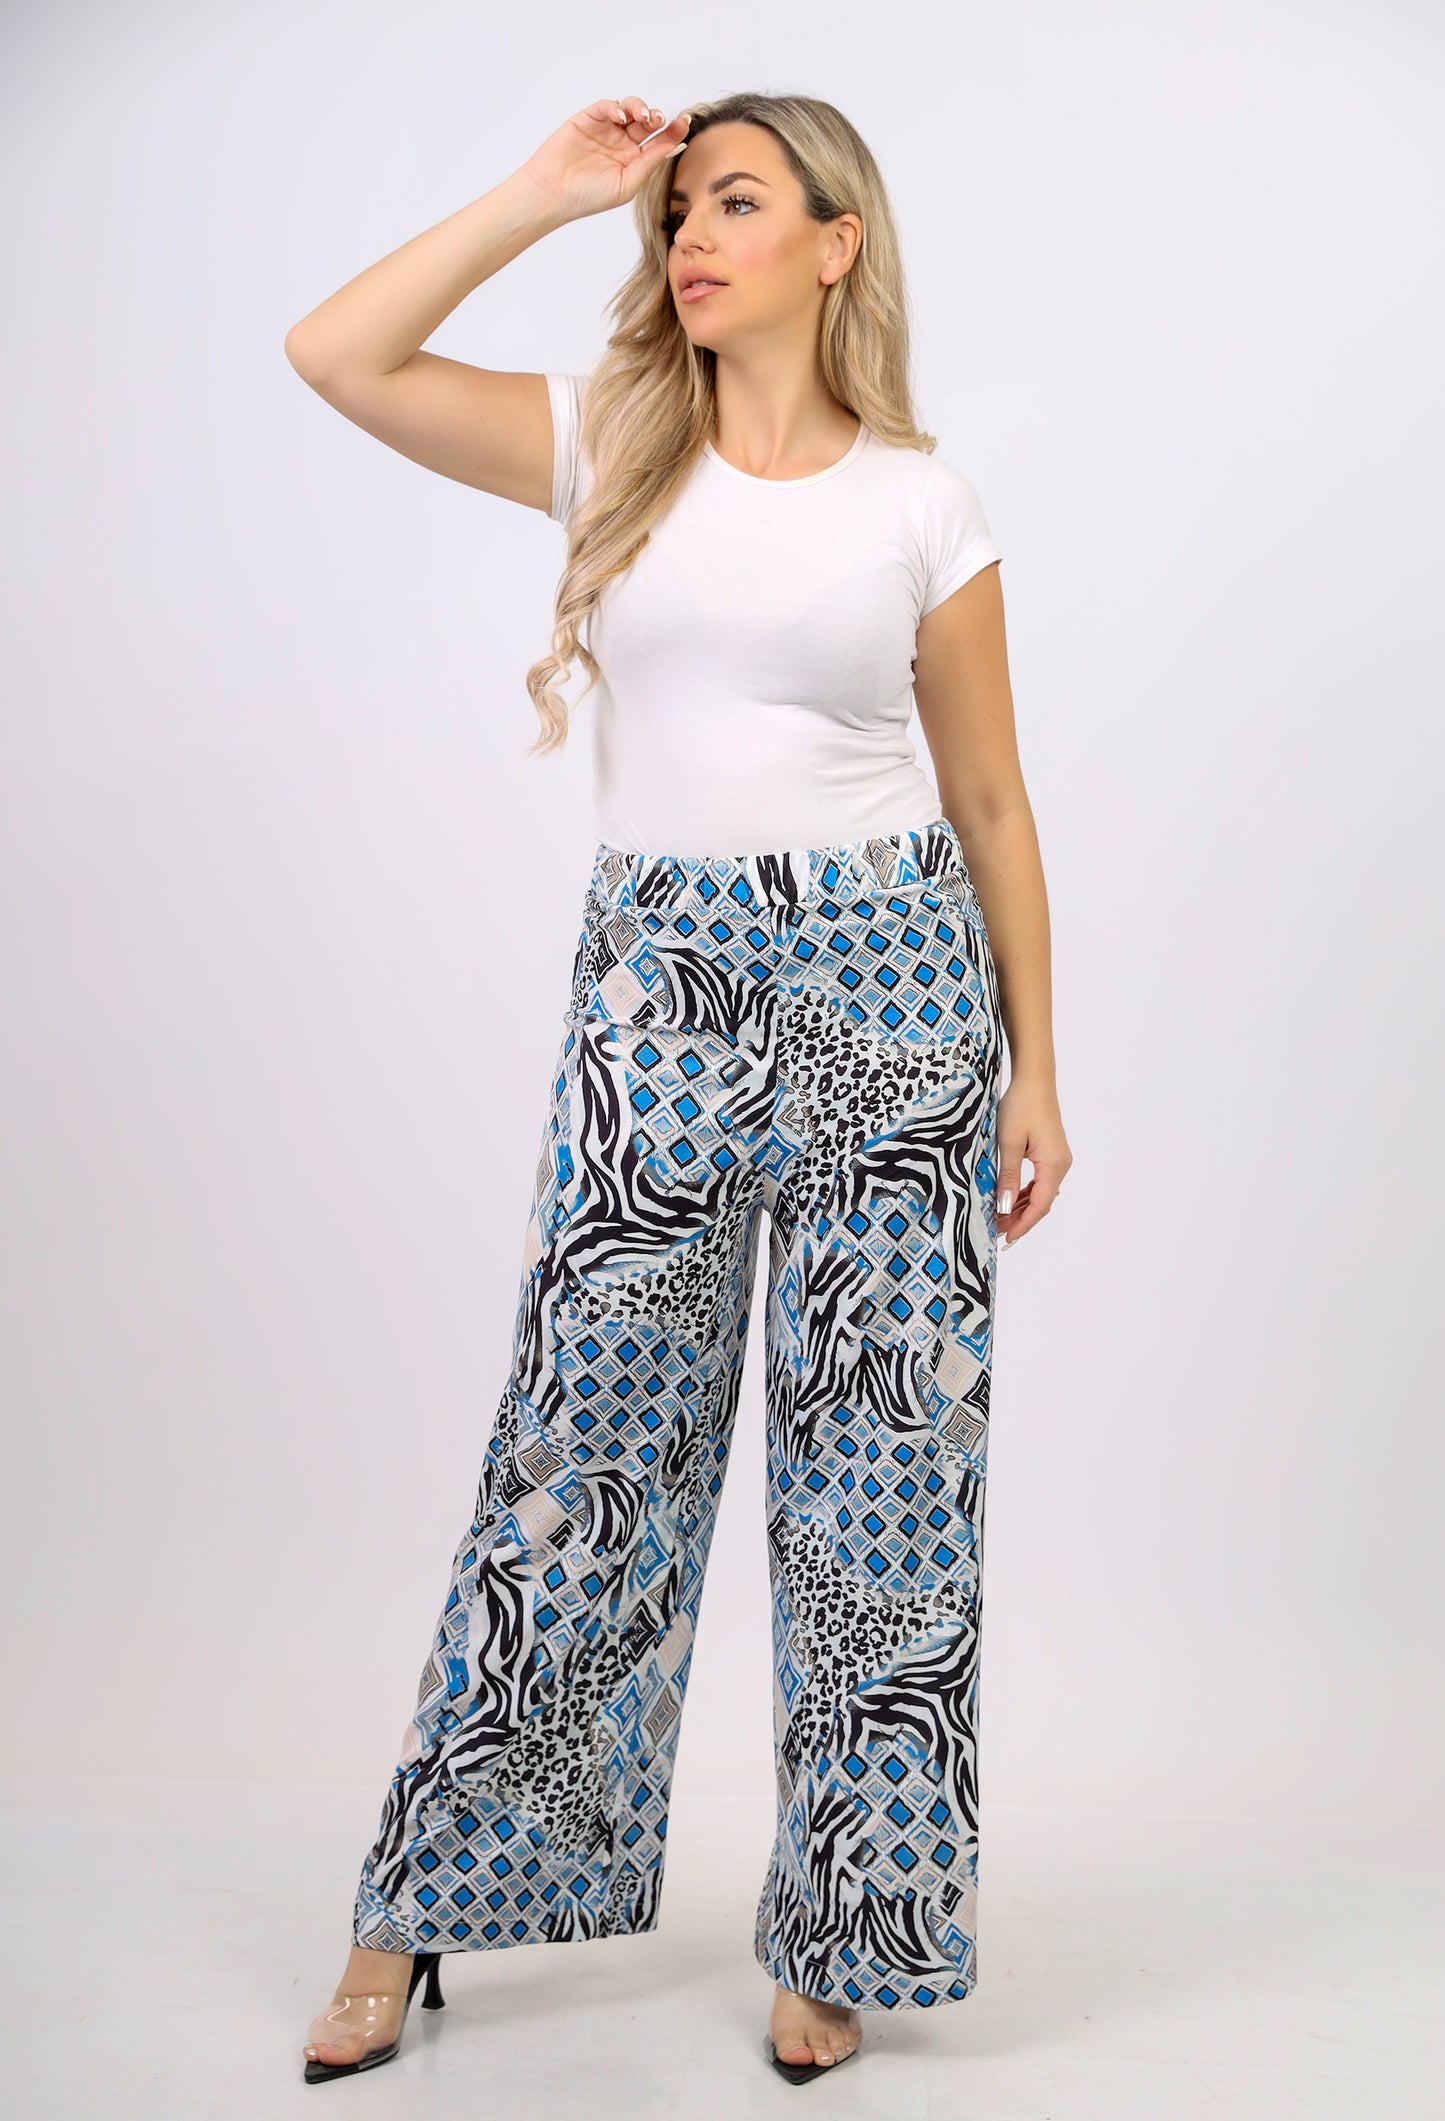 Surreal Allover Print Woven Blue Pants